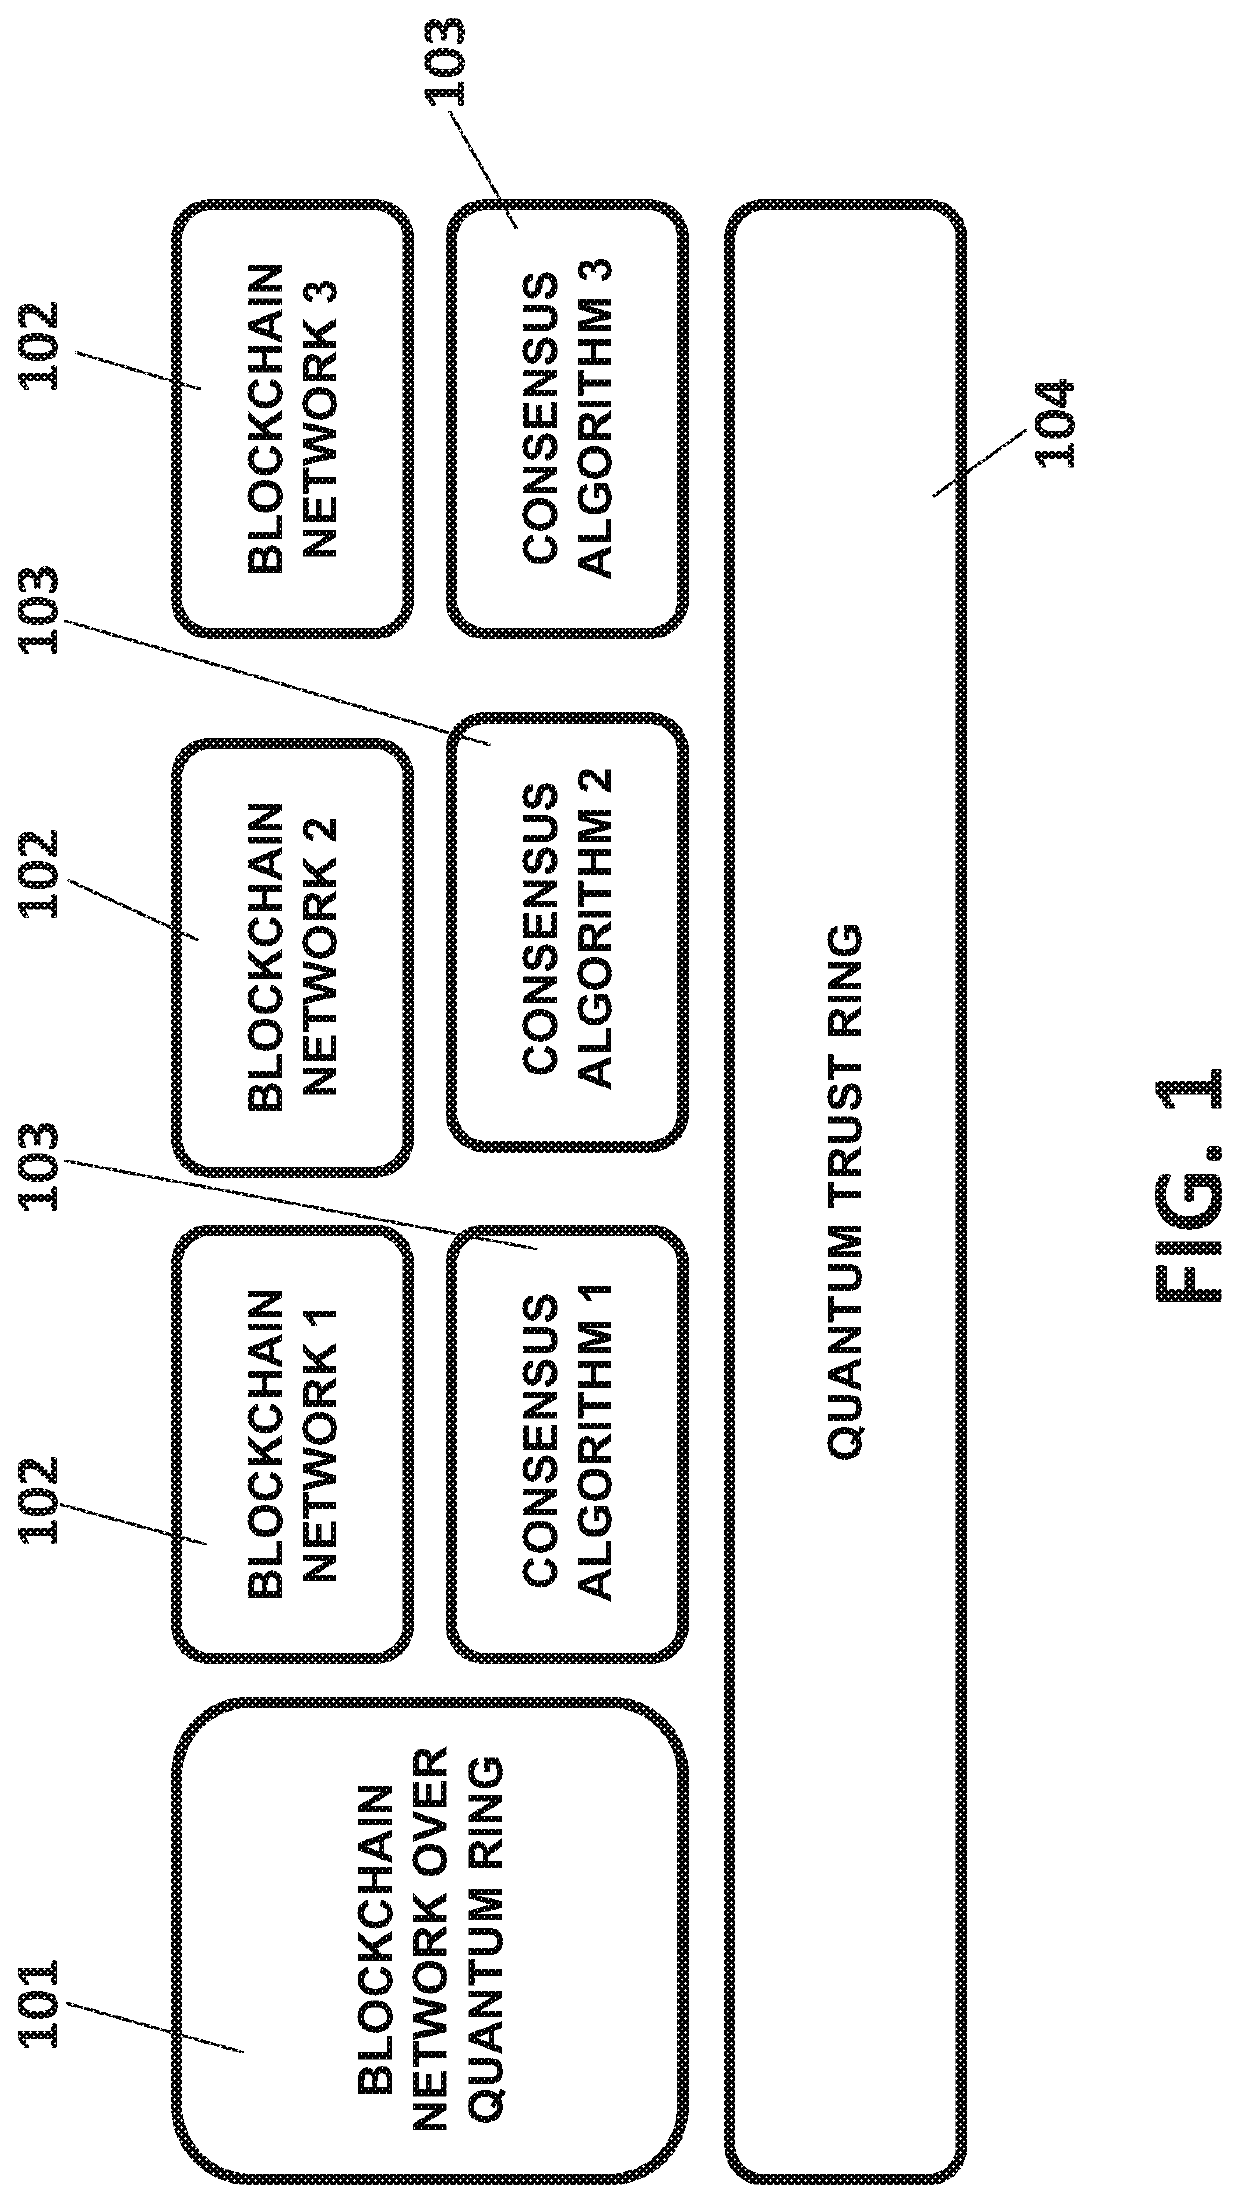 Method and system for dlt networks consensus enhancement using quantum computing mechanisms